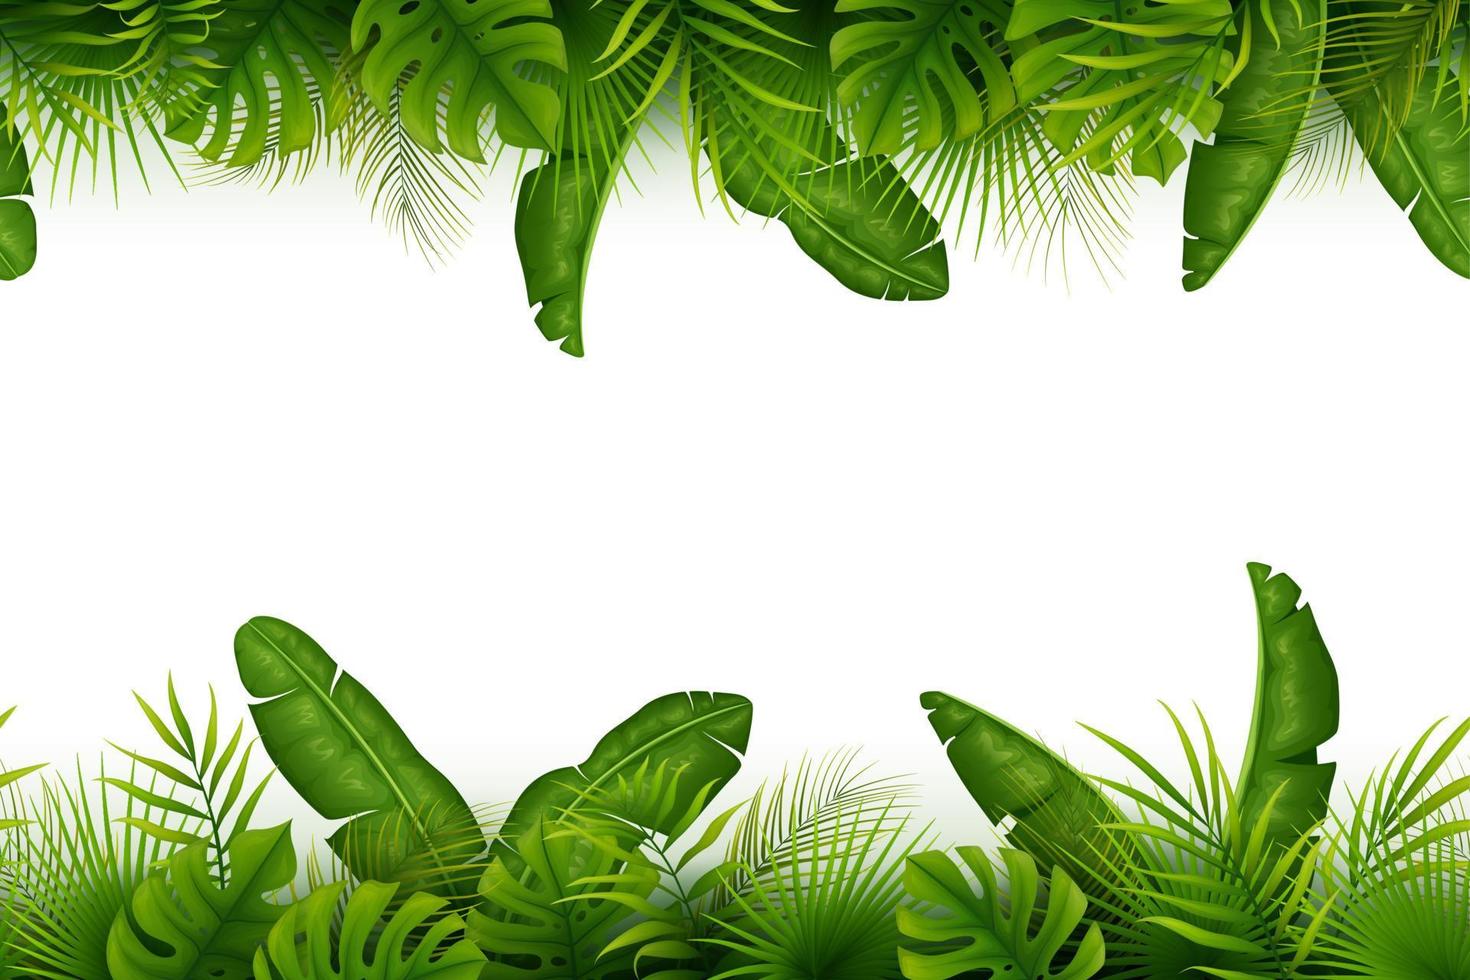 Tropical jungle background with palm trees and leaves on white background vector